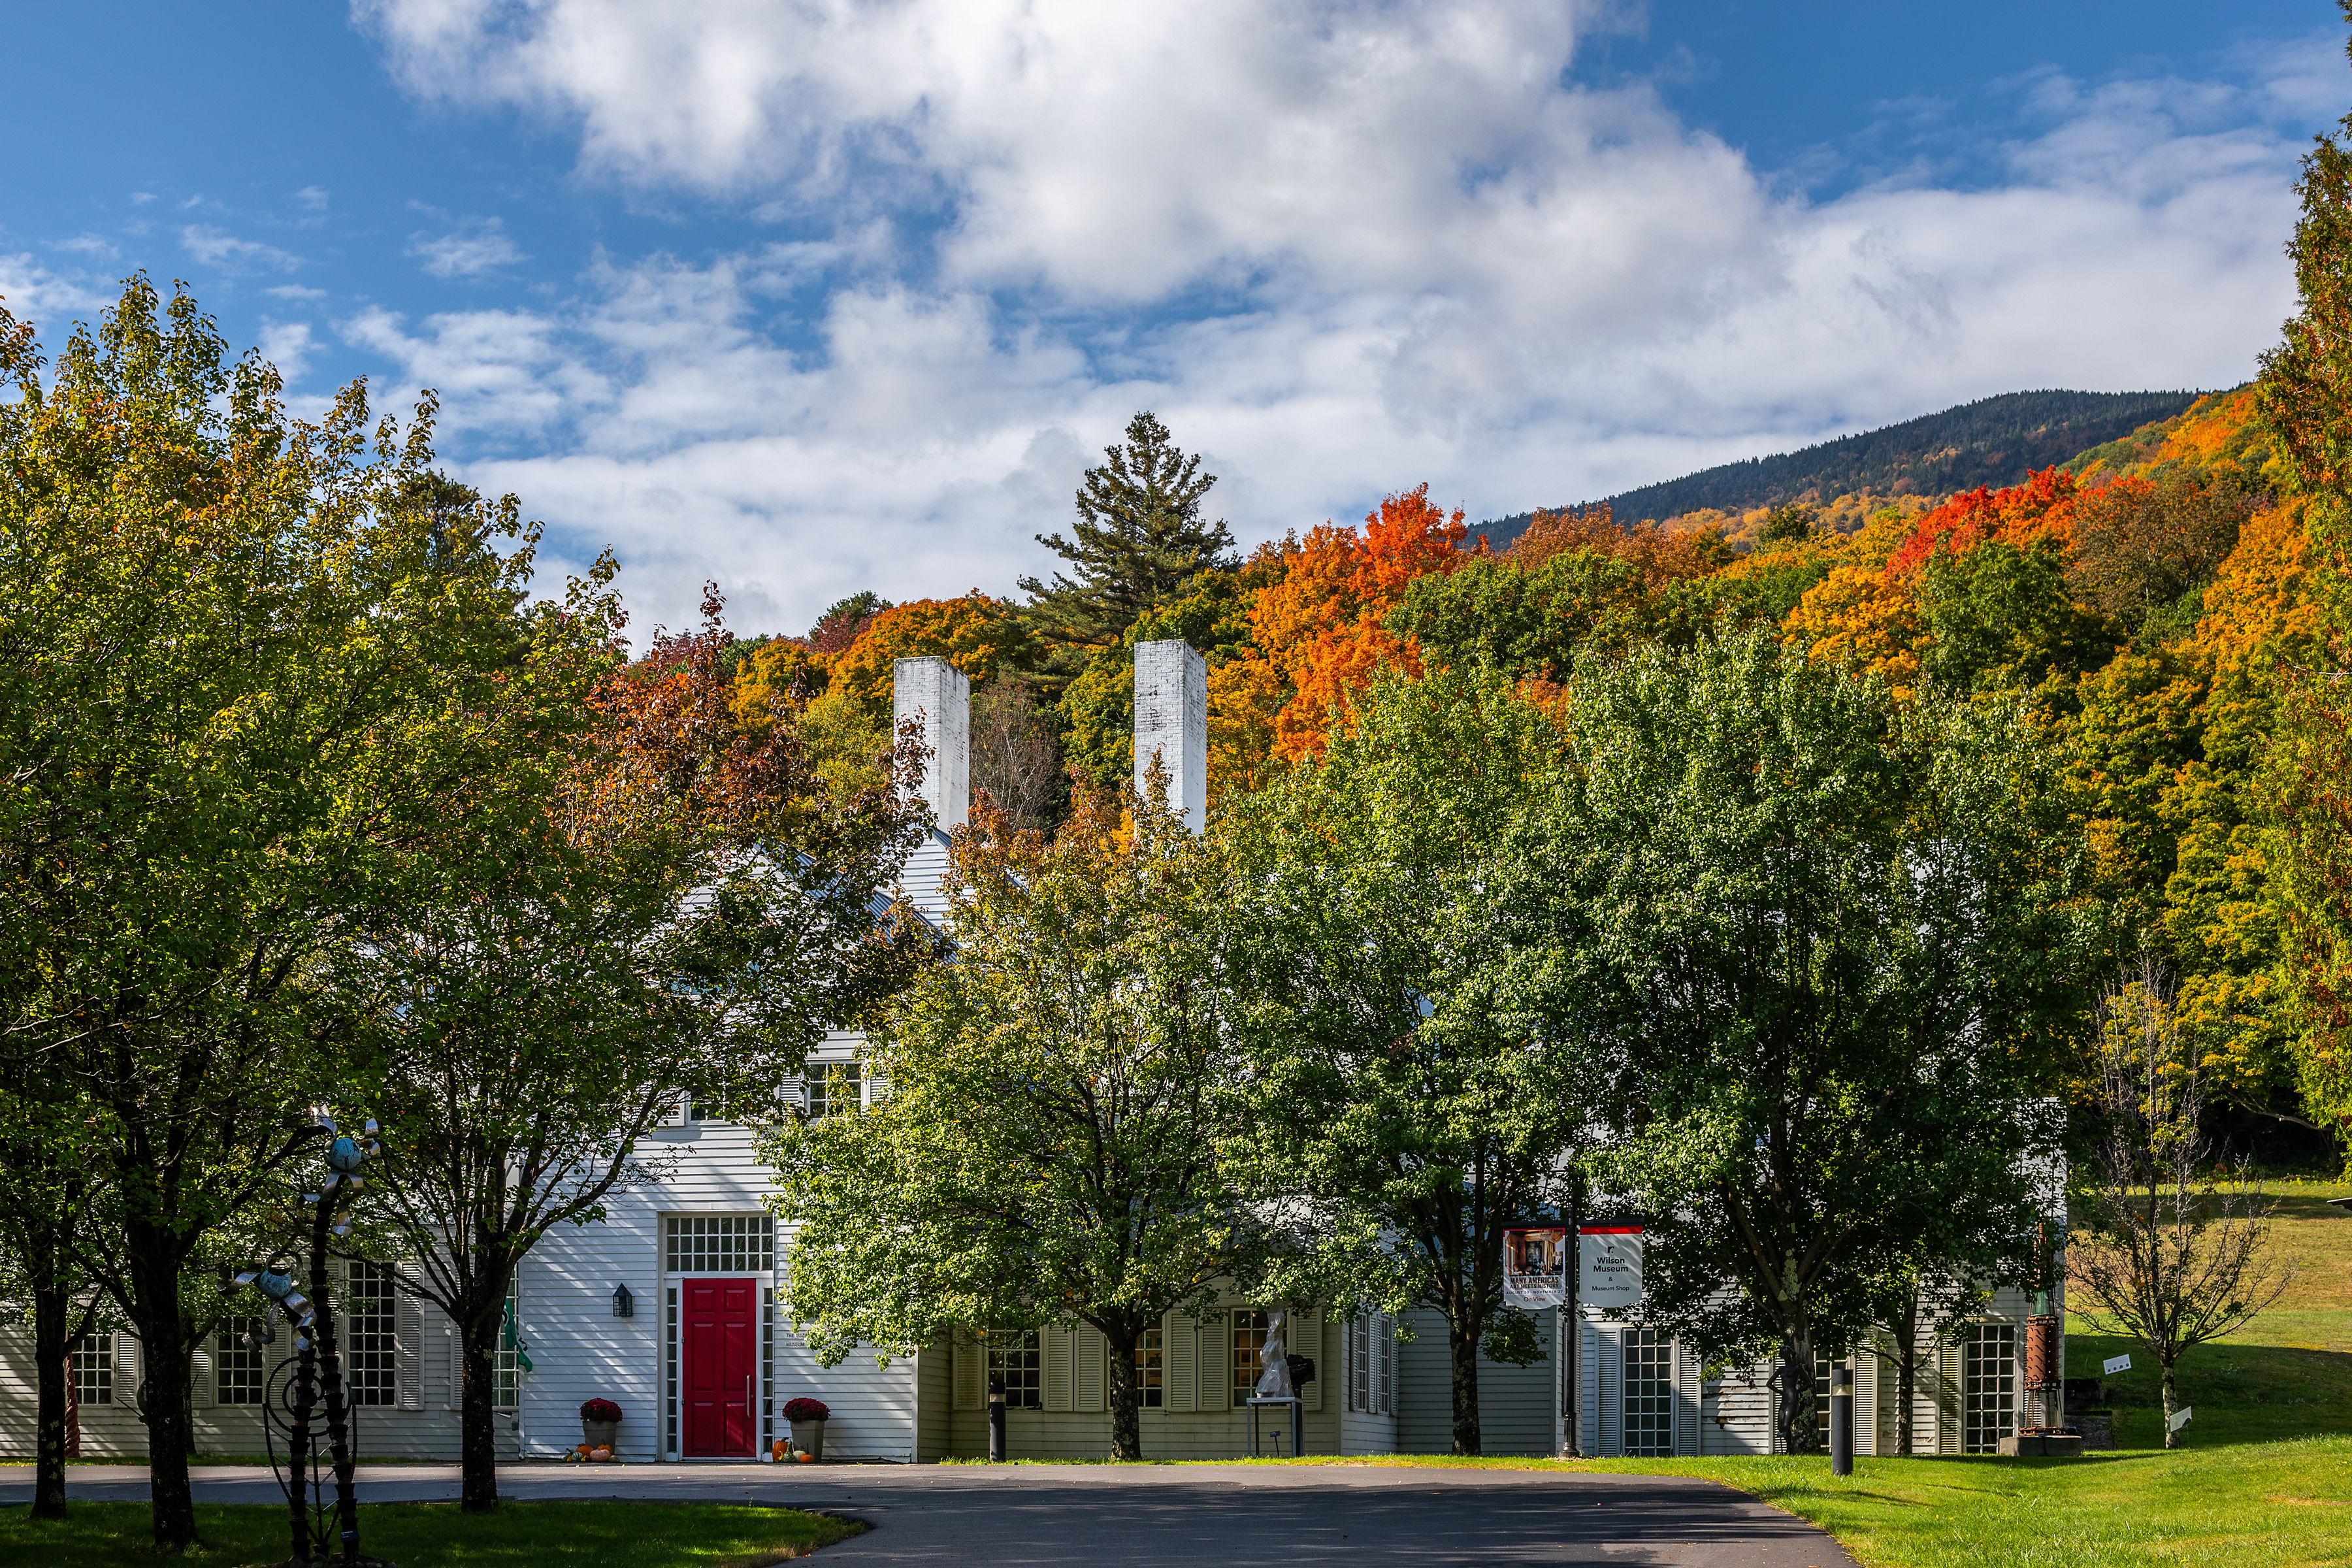 Exterior and surroundings of Southern Vermont Arts Center.